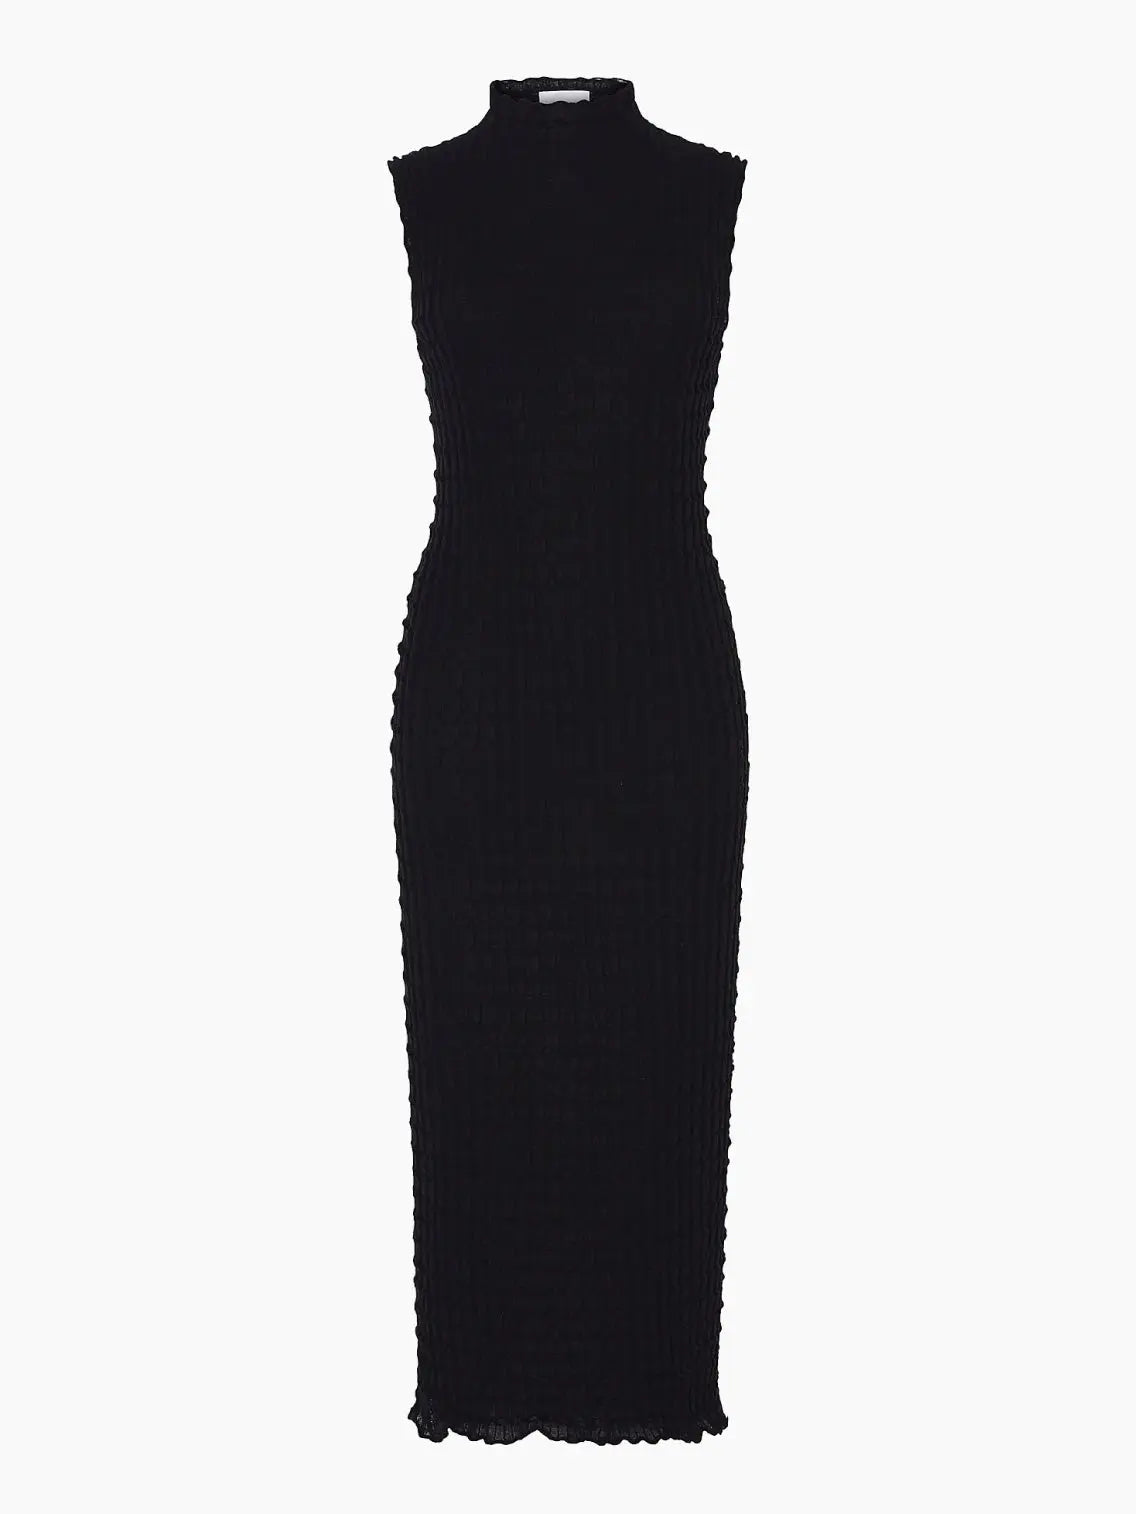 Image of the Udon Dress Ink by Rus, a black, sleeveless, ribbed-knit dress with a high neckline and a fitted silhouette. The dress extends to mid-calf length, showcasing a sleek, elegant design. Available at Bassalstore in Barcelona, the hemline has a slight scalloped edge.